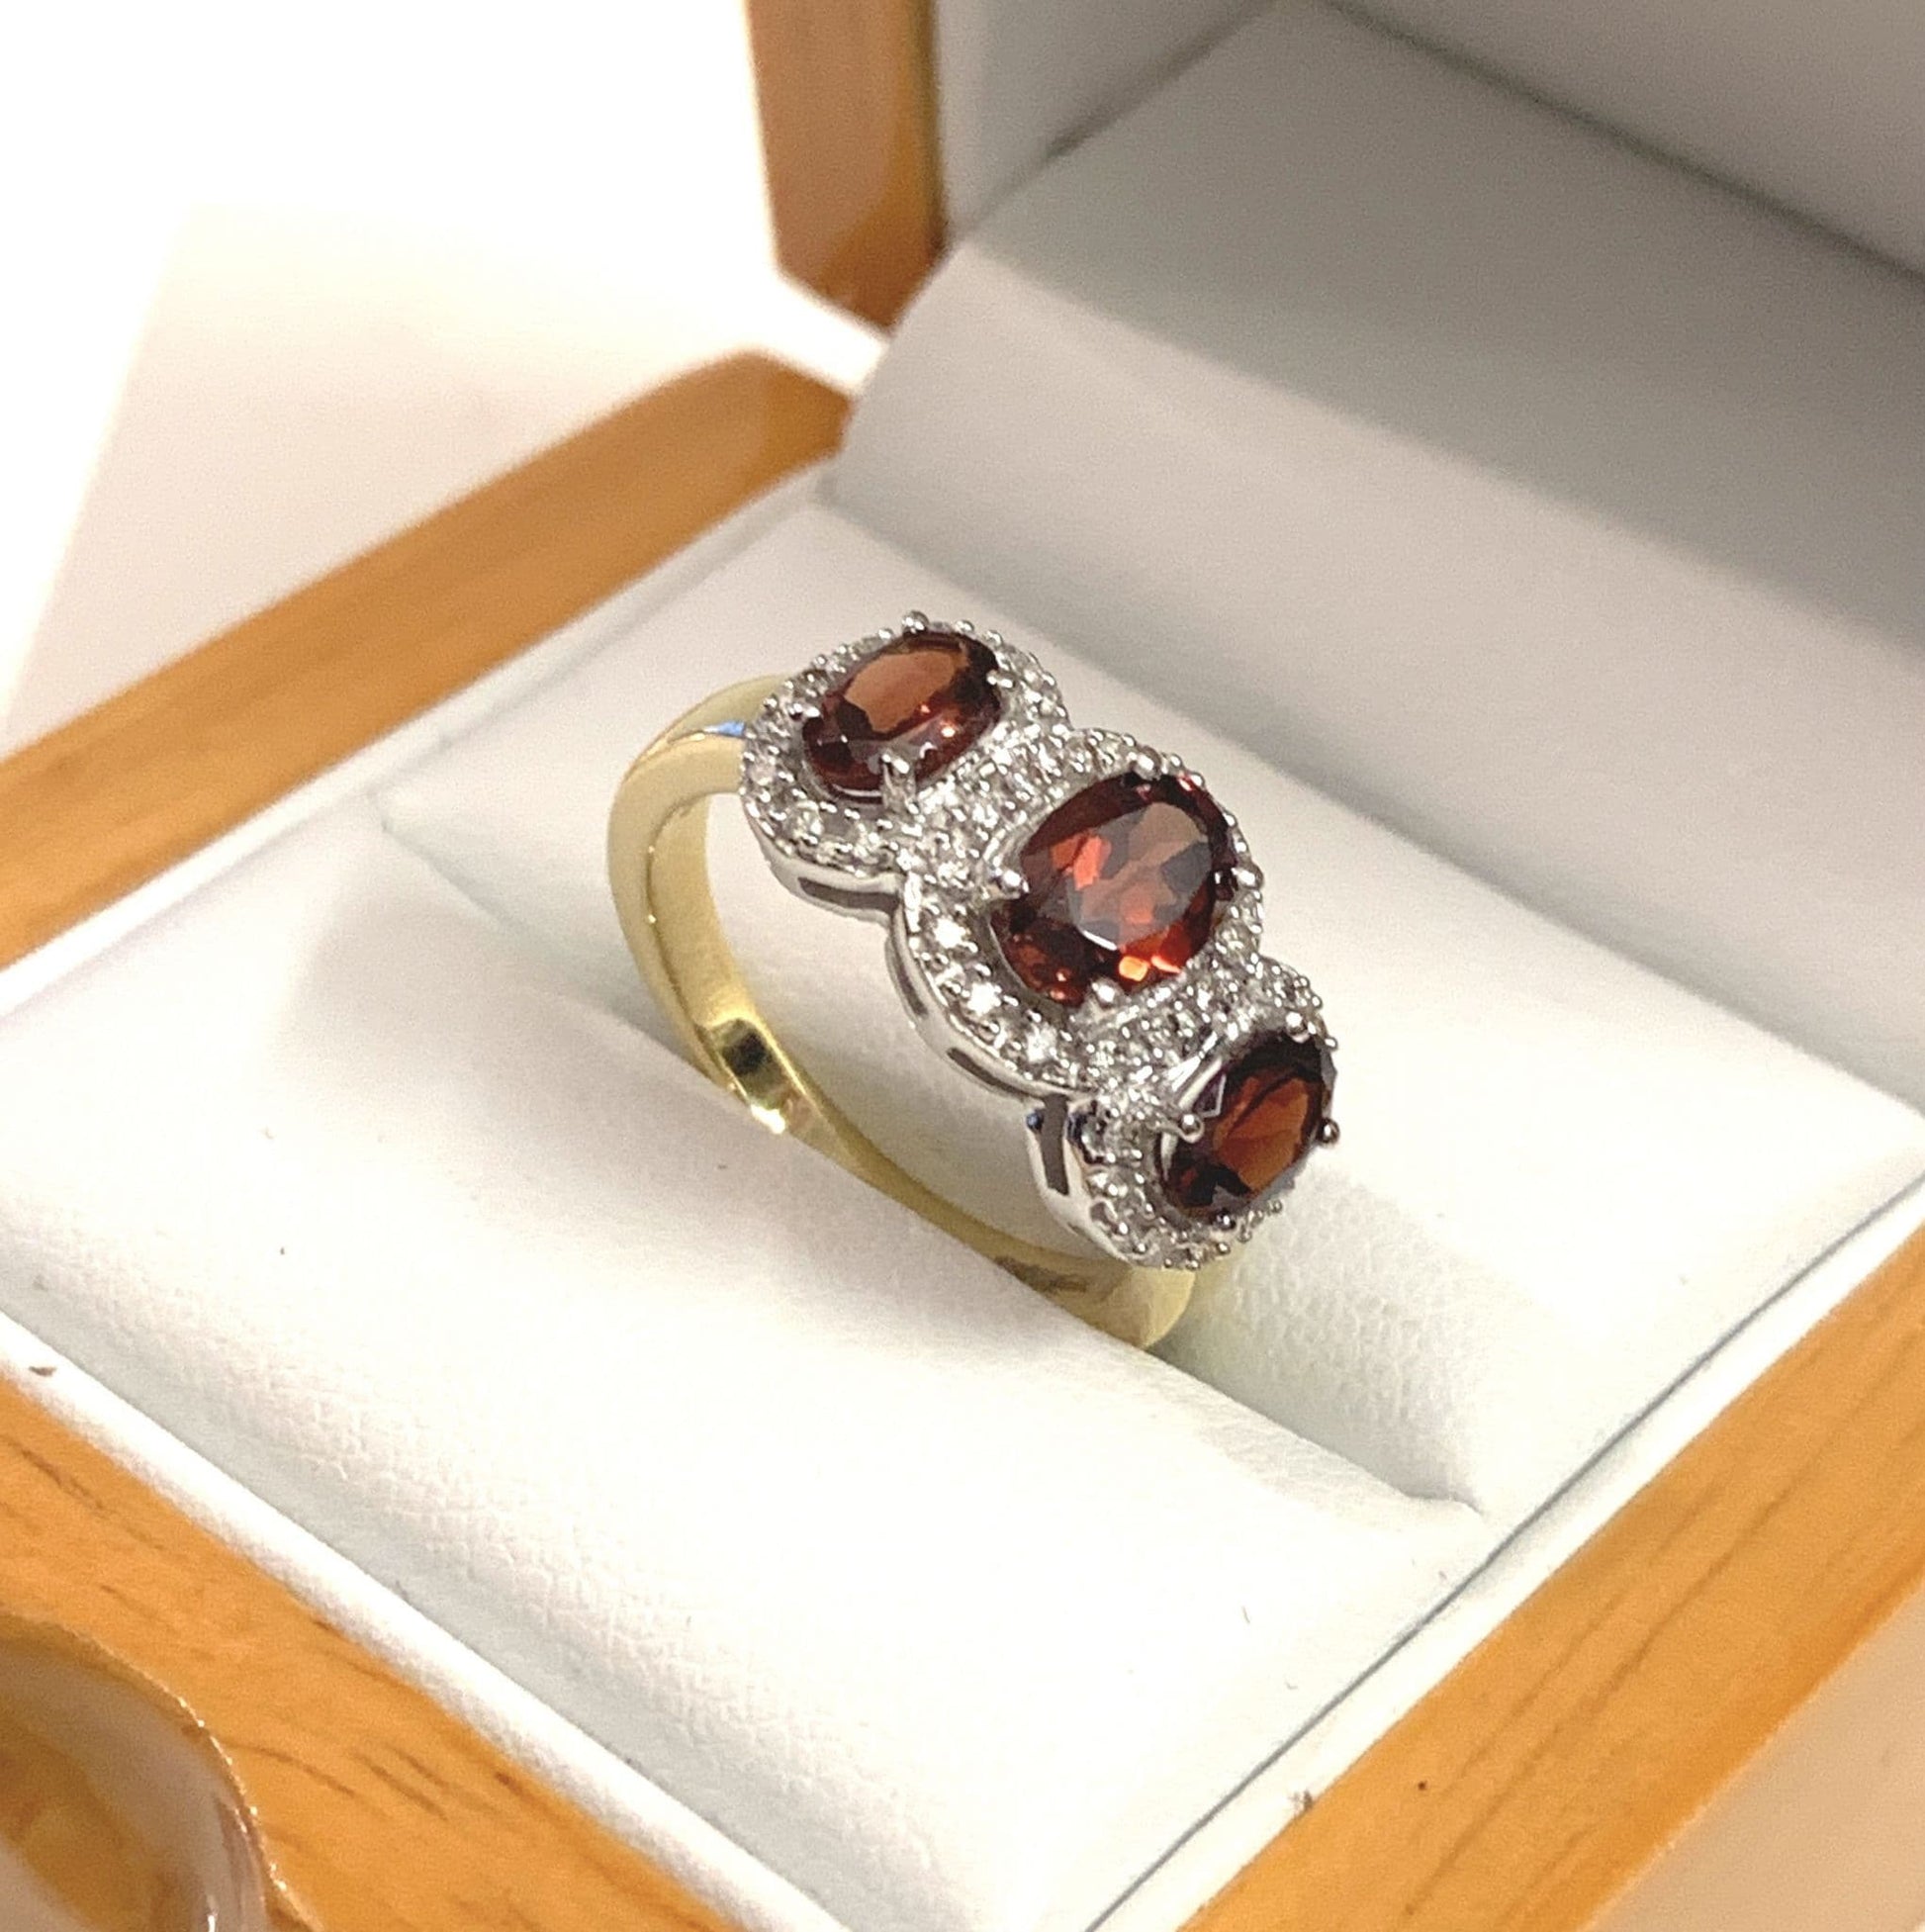 Garnet ring oval triple trilogy cluster with diamonds 18 carat yellow gold